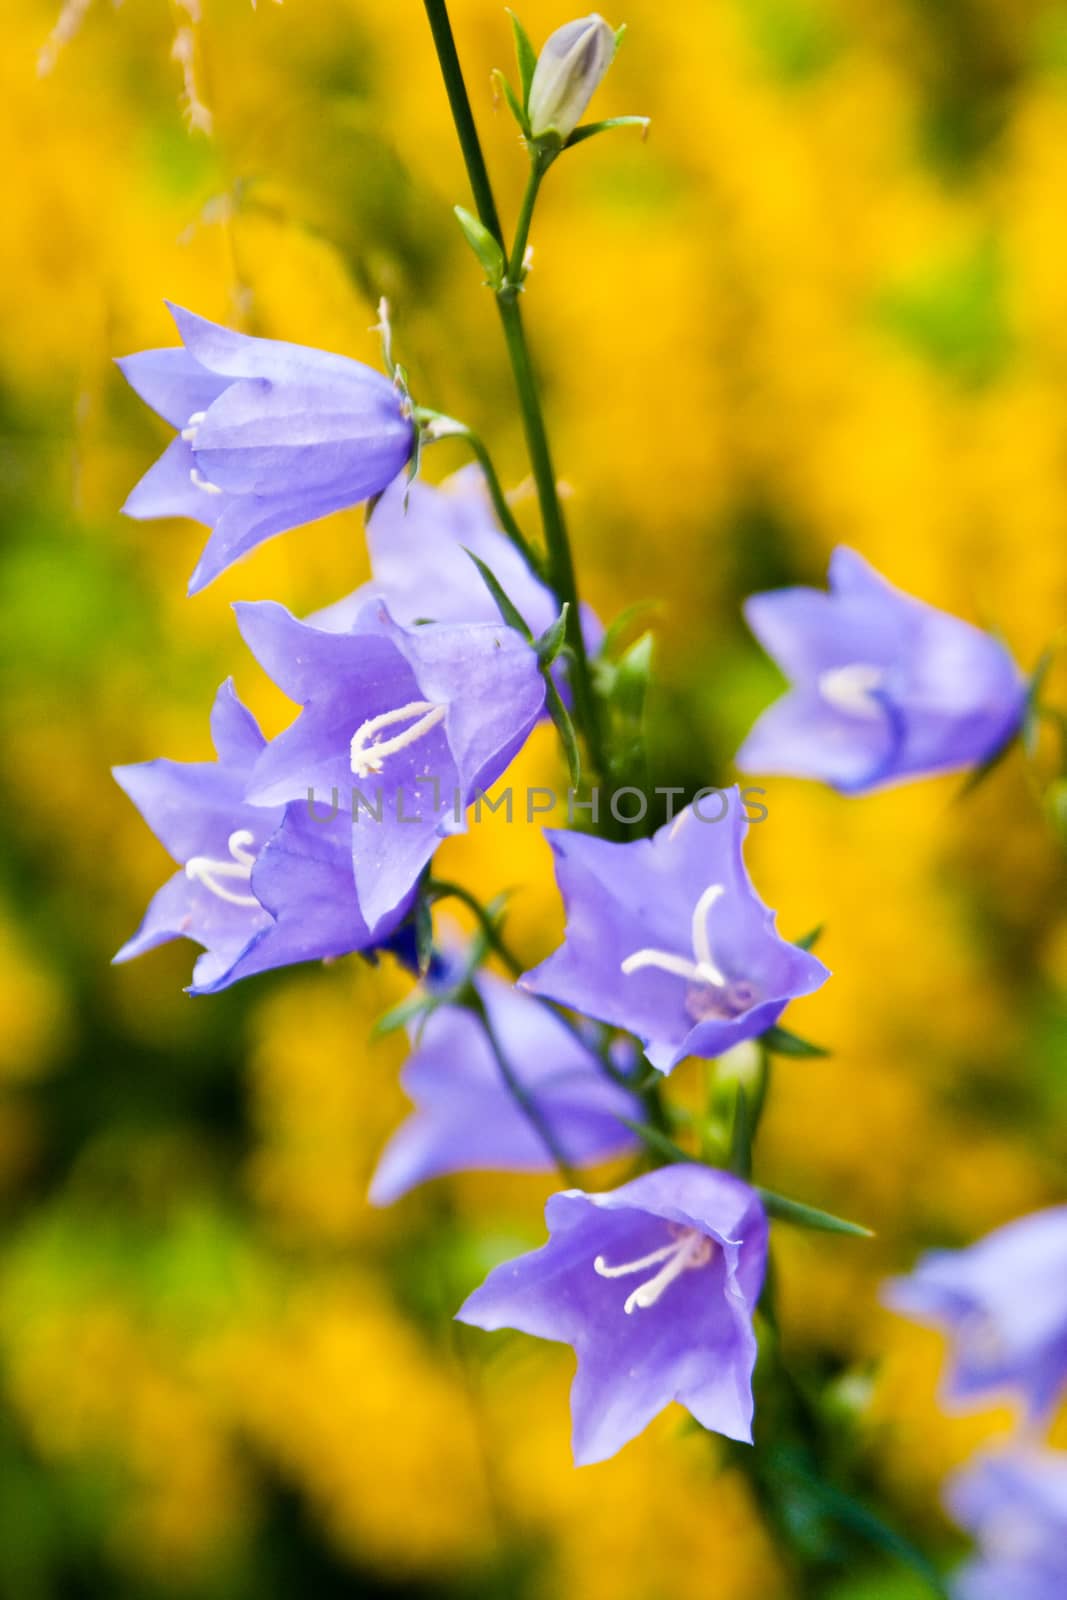 Bluebells in the garden outside the city on a background of yellow loosestrife